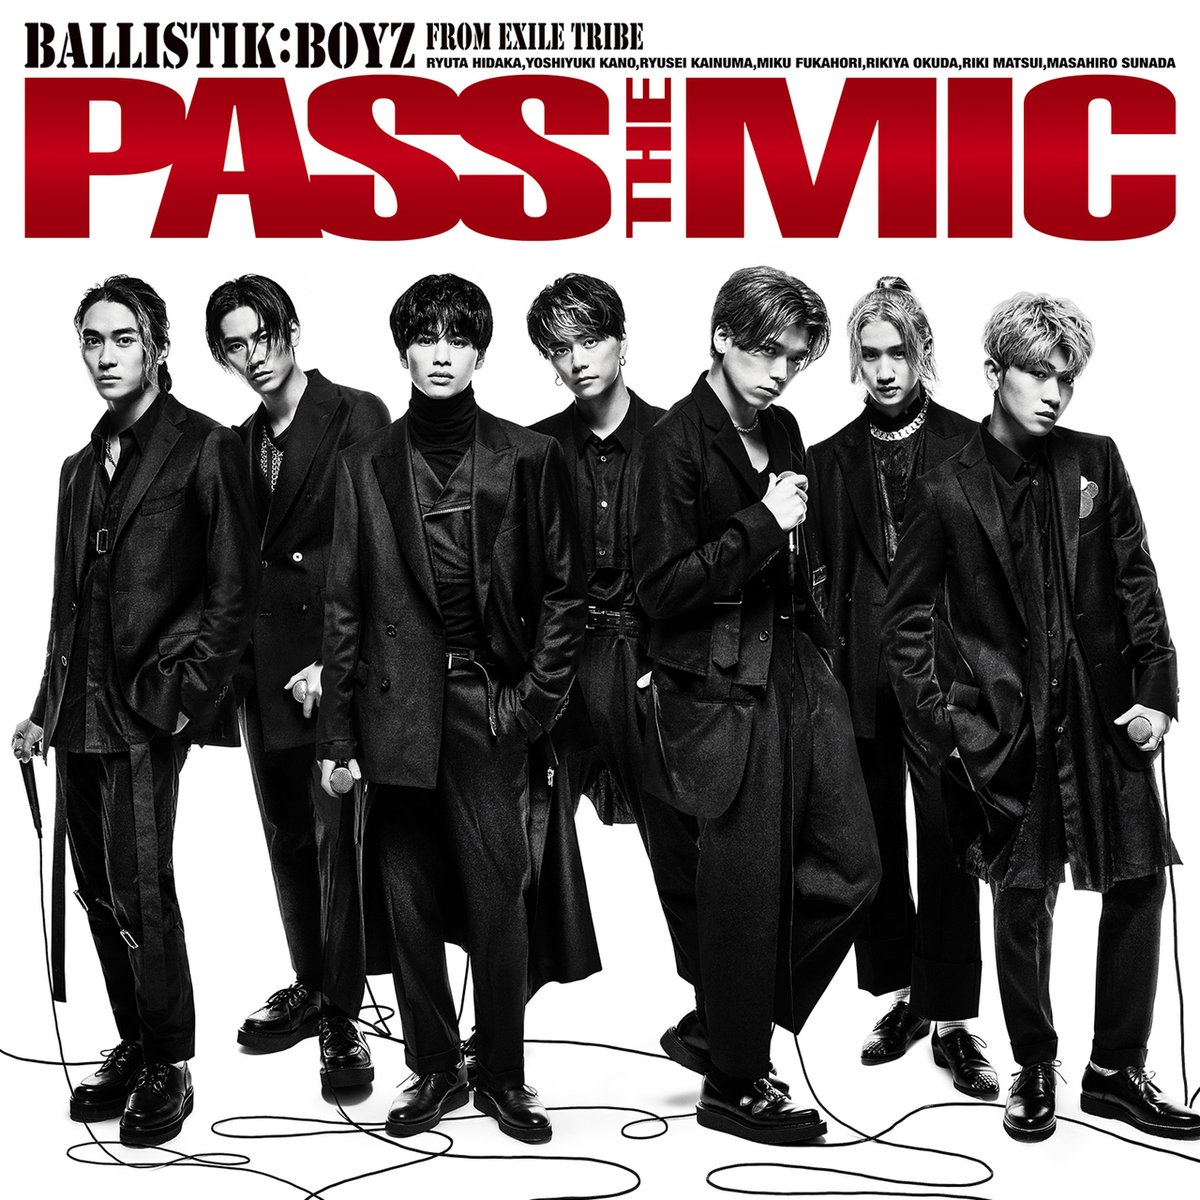 『BALLISTIK BOYZ from EXILE TRIBE - Crazy for your love』収録の『テンハネ -1000%-』ジャケット